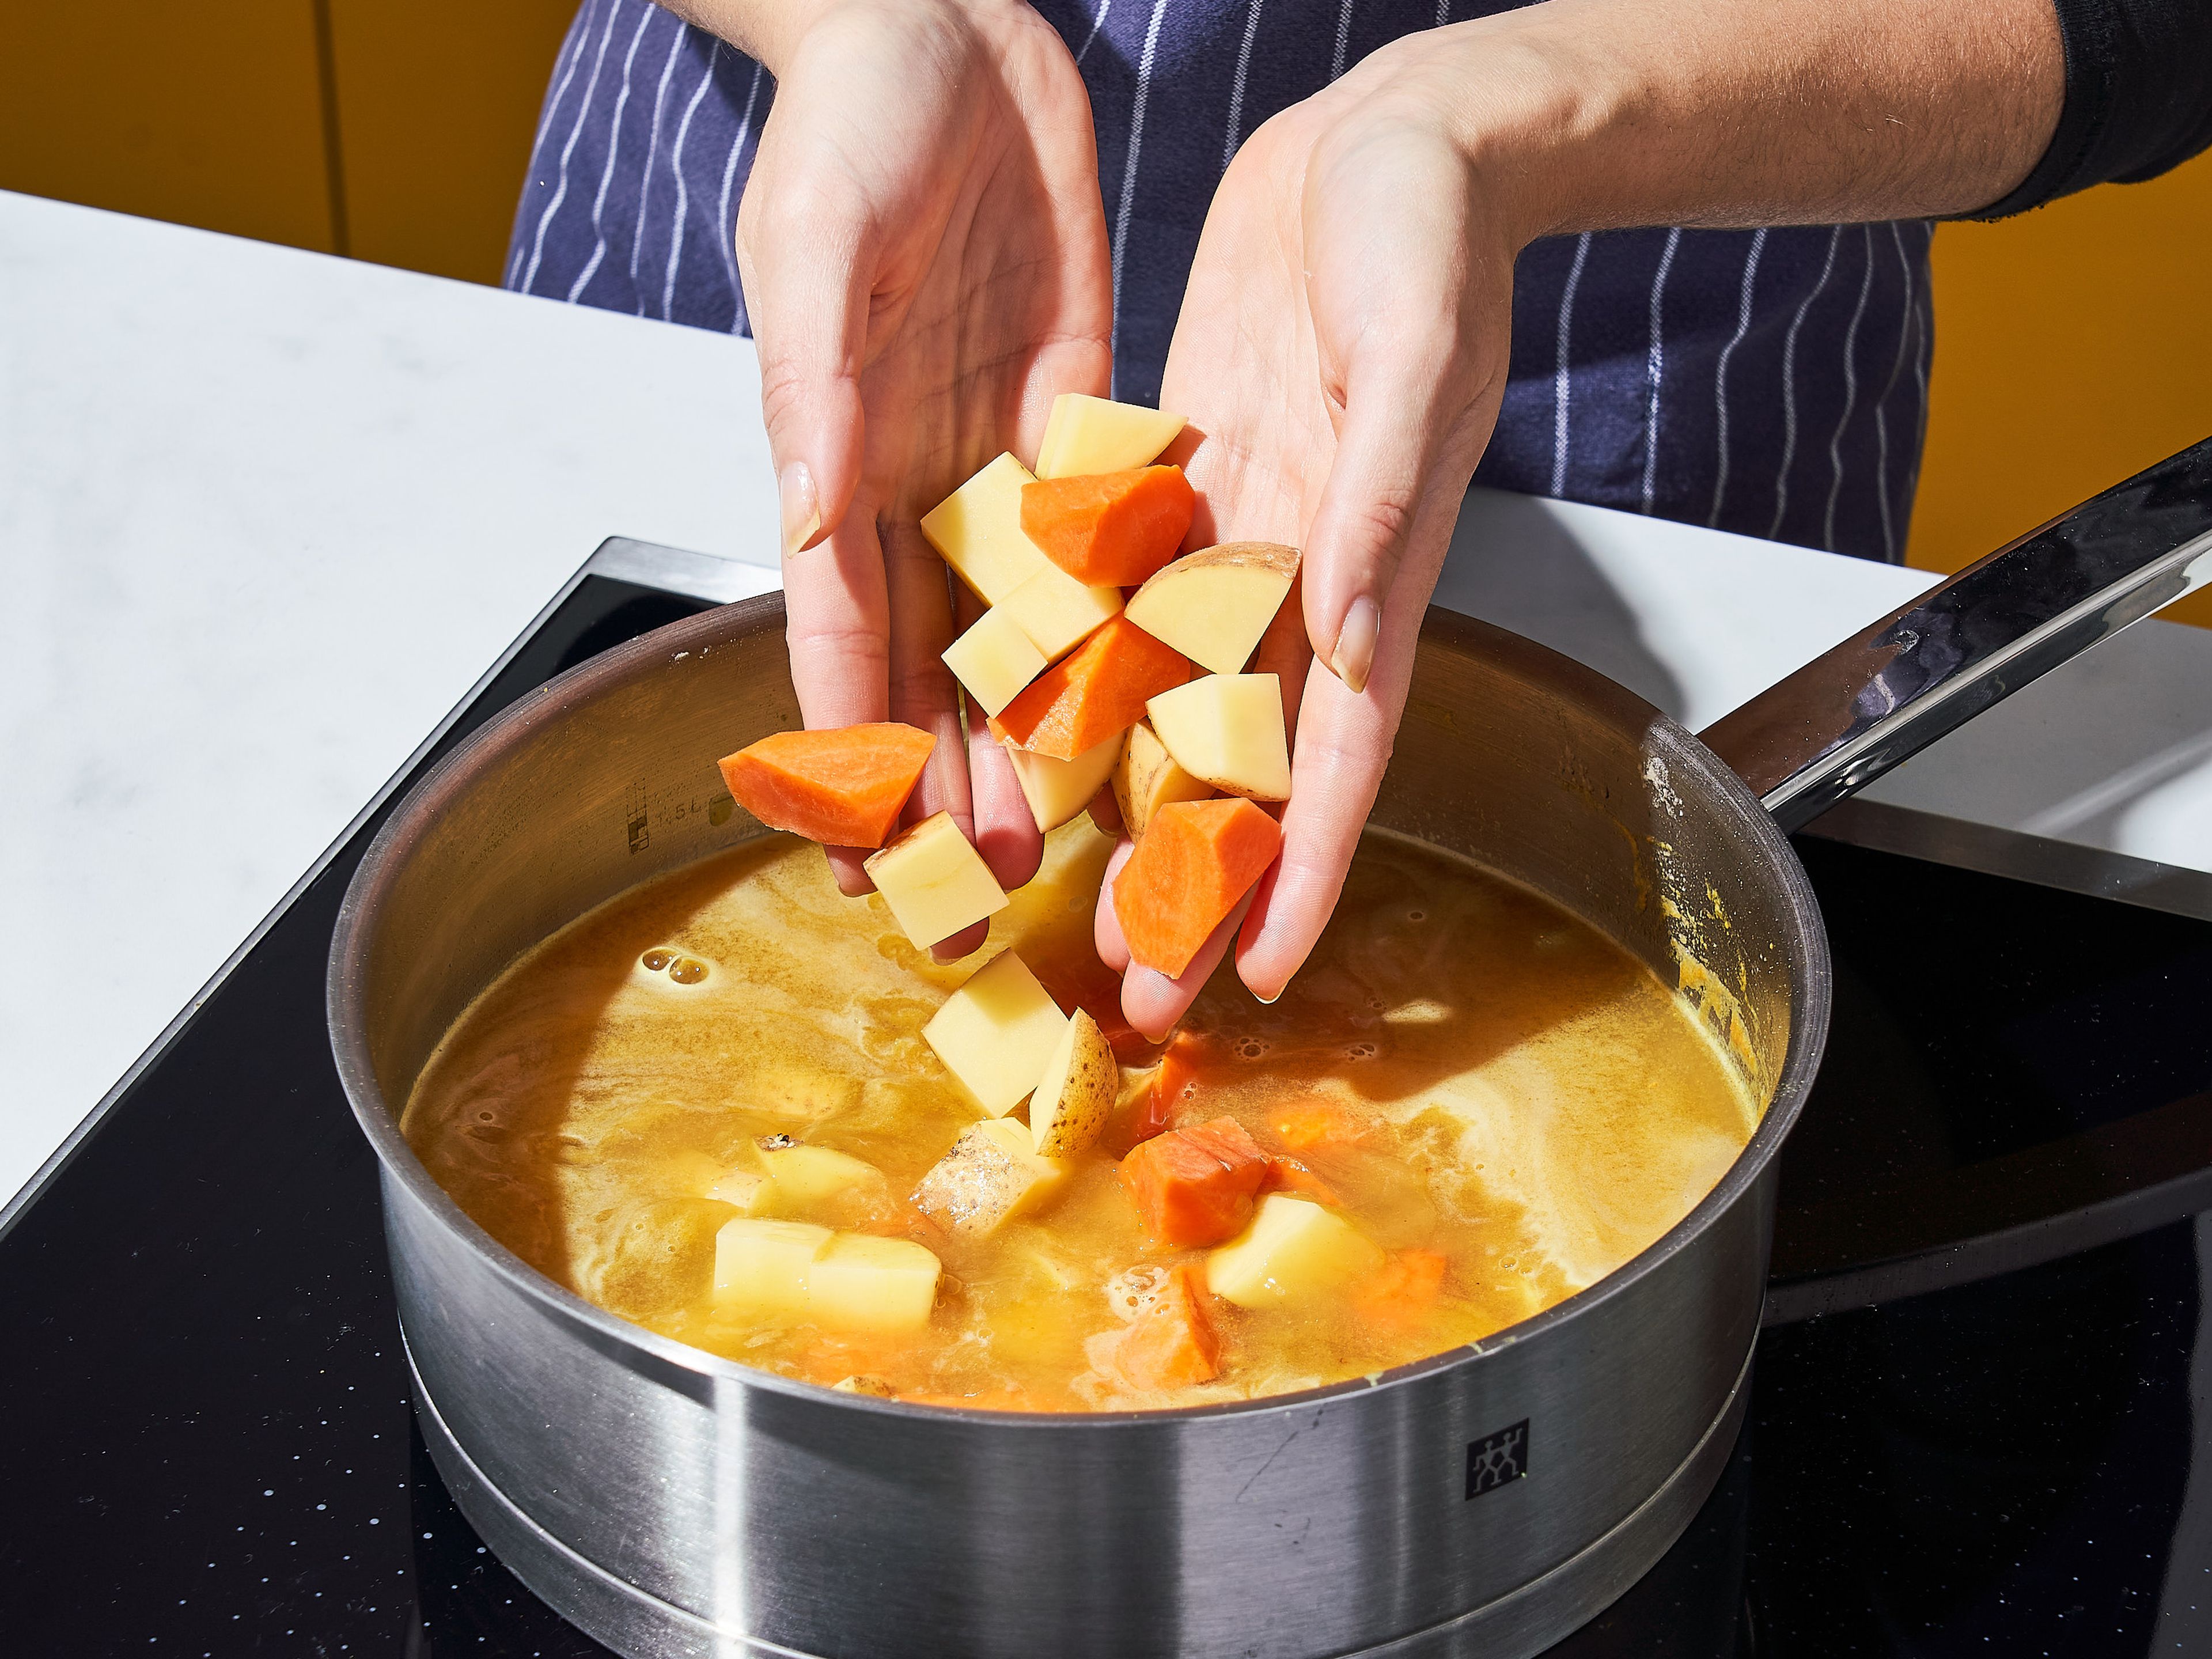 Deglaze with chicken stock and apple juice, then add sugar, vinegar, soy sauce, potatoes, and carrots to the pot. Let simmer over low heat for approx. 30 min., or until the sauce is thickened but still pourable and the vegetables are tender all the way through. Season with salt to taste.